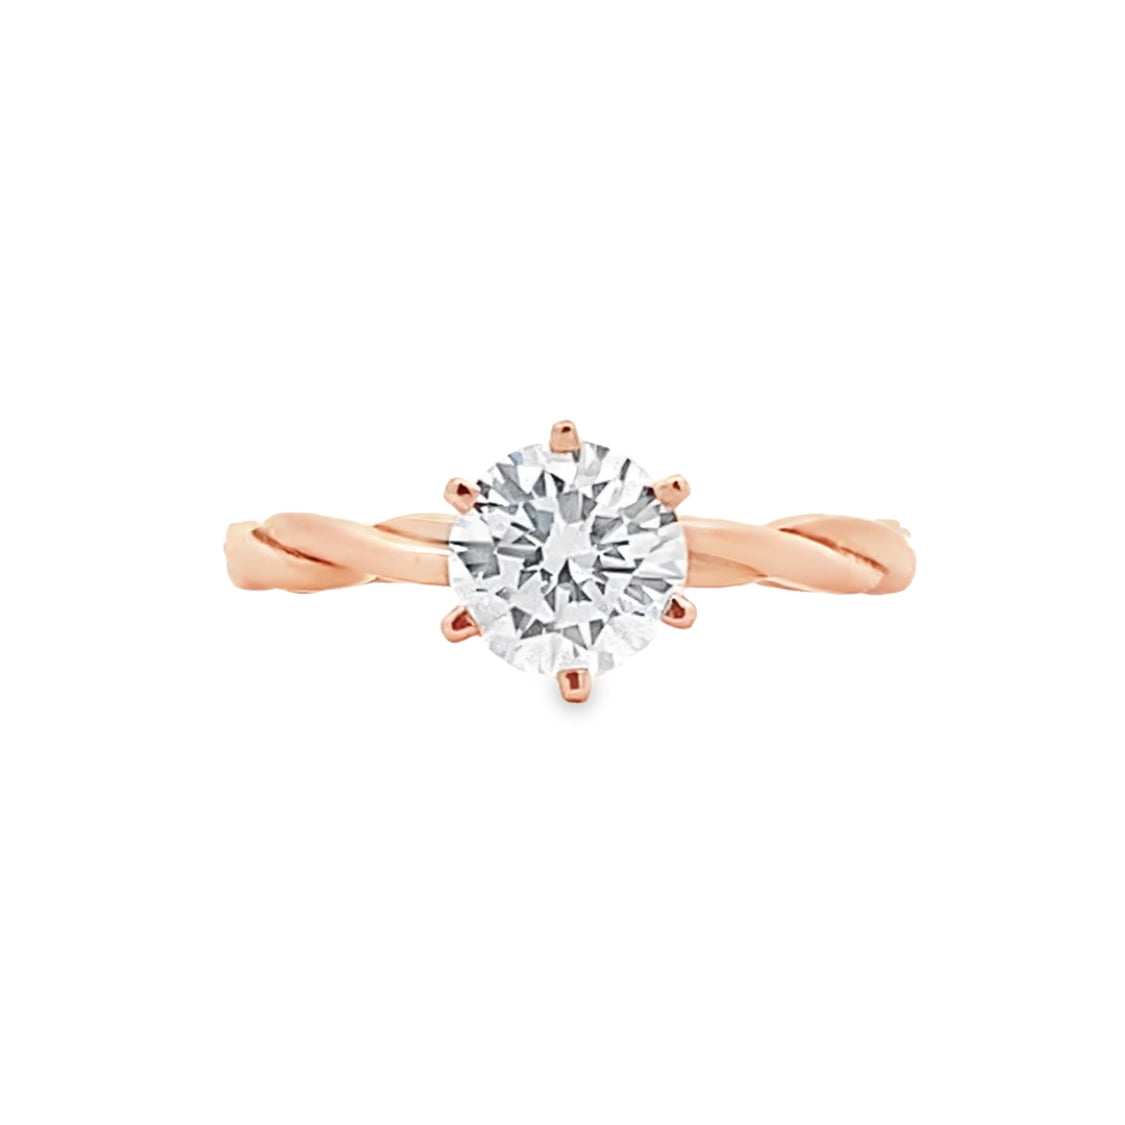 Beeghly & Co. 14 Karat Twist Solitaire Engagement Ring